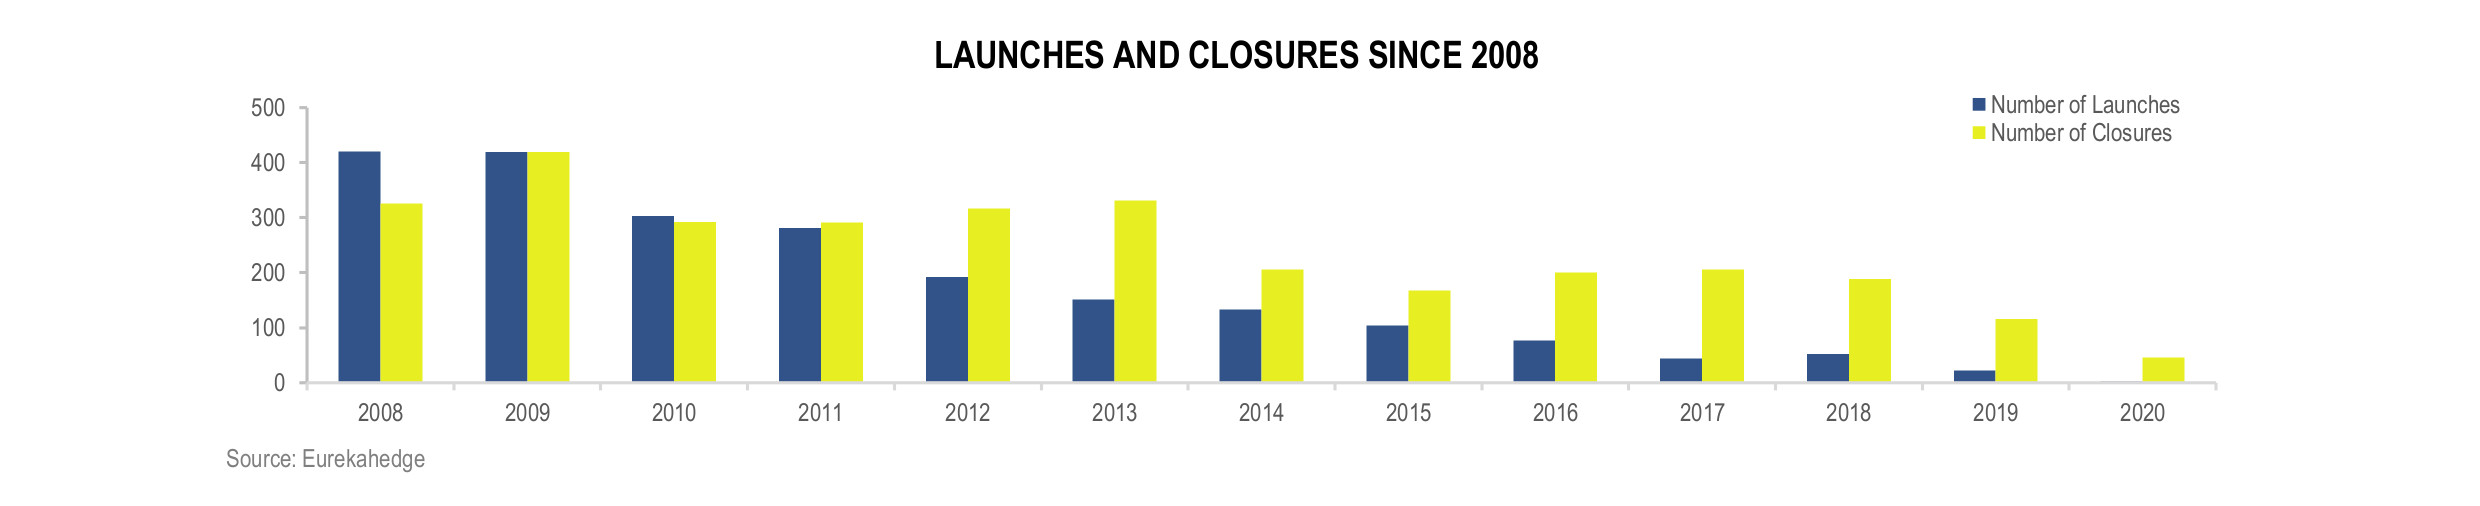 Funds of Hedge Funds Infographic June 2020 - Launches and Closures